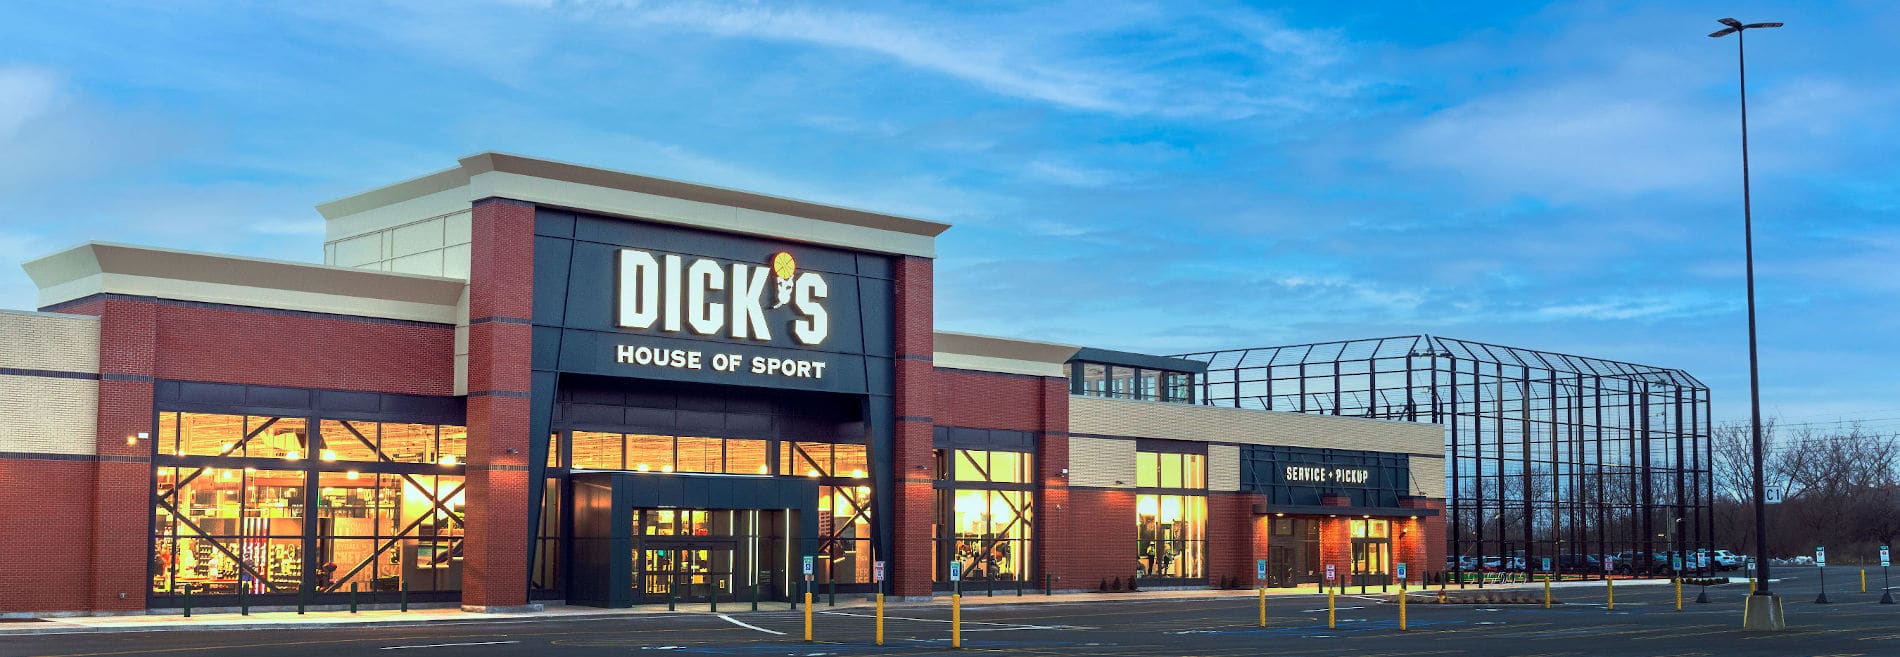 Dick's House of Sports